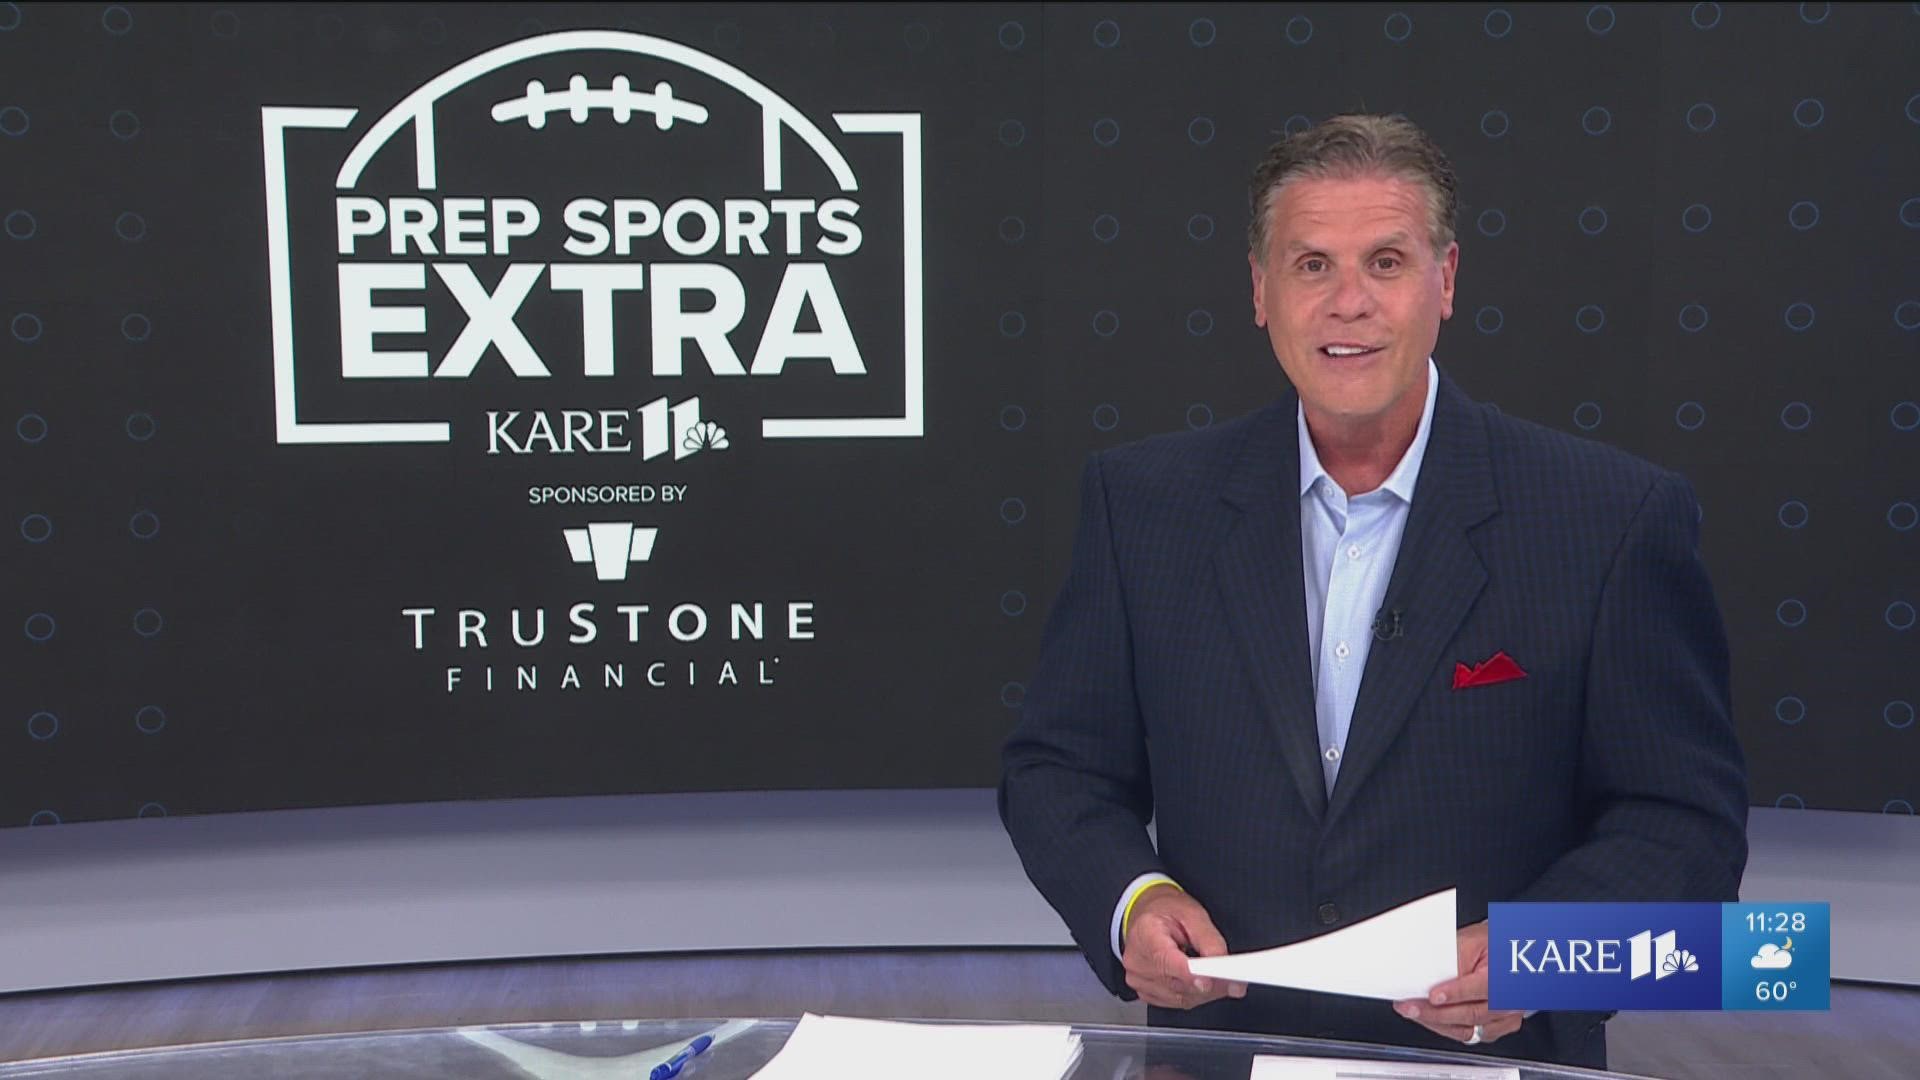 Randy Shaver returns to host the 39th season of the KARE 11 Prep Sports Extra, where he'll feature high school football highlights from all over the state.